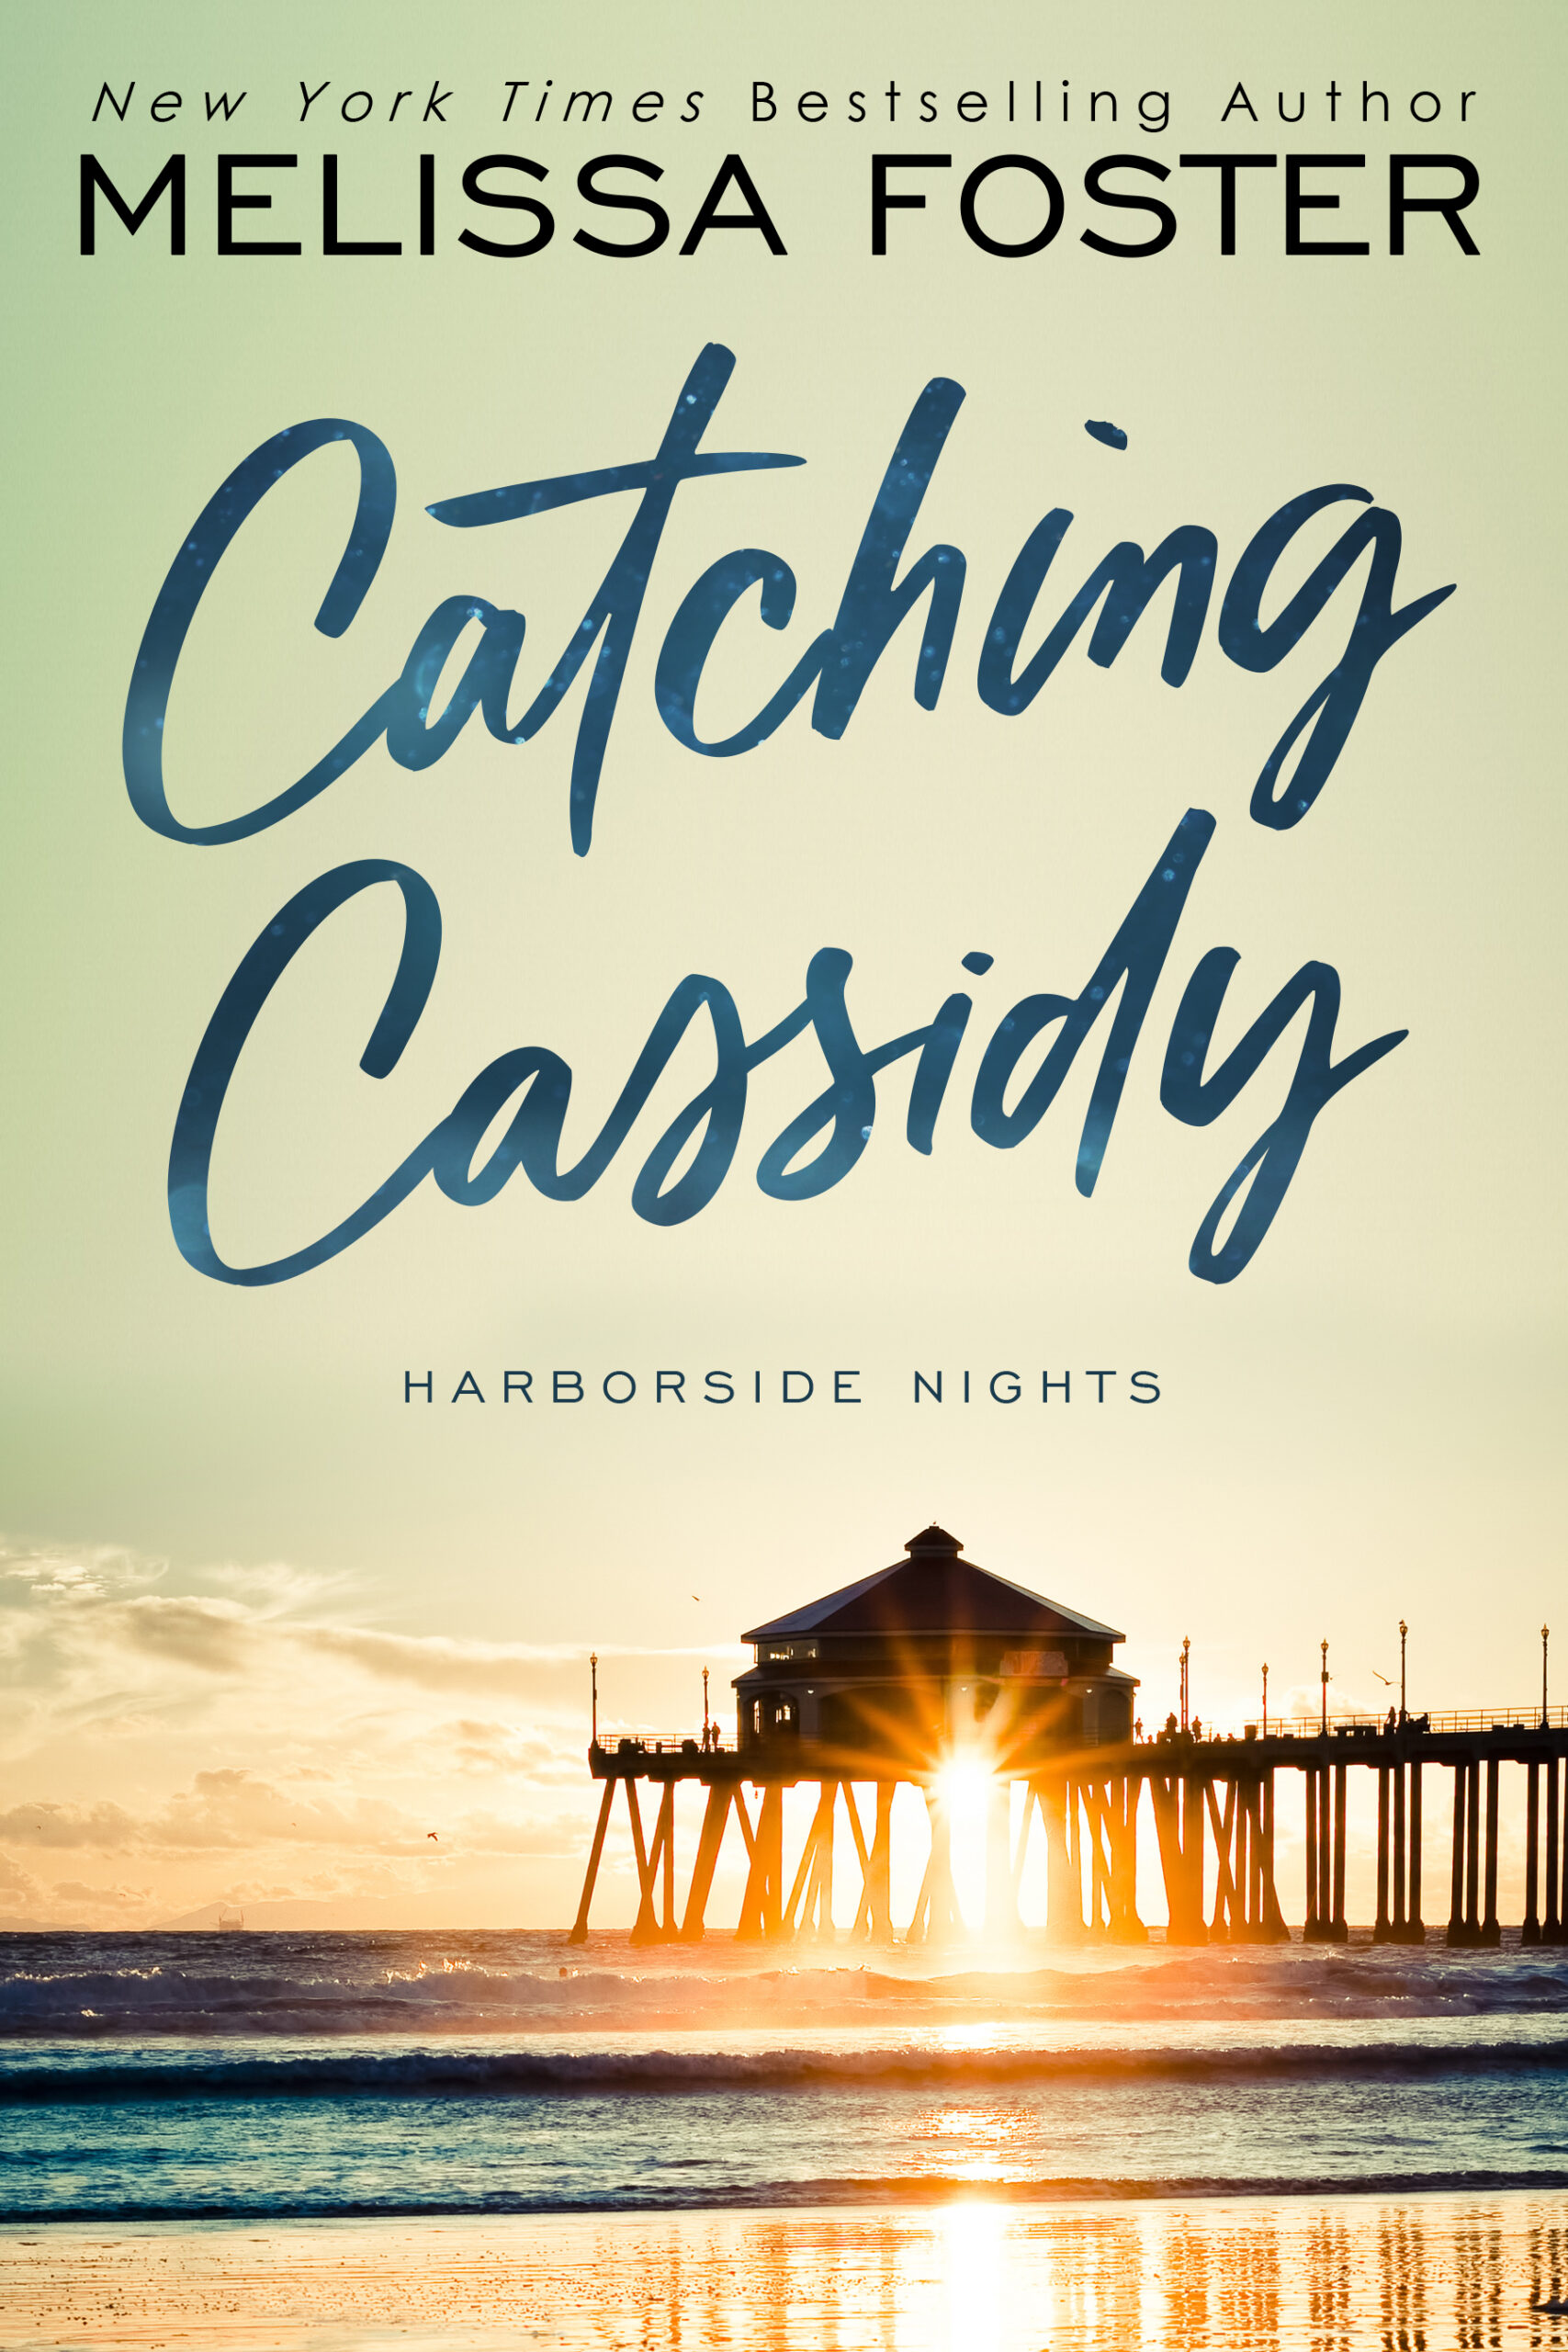 Catching Cassidy by Melissa Foster paperback